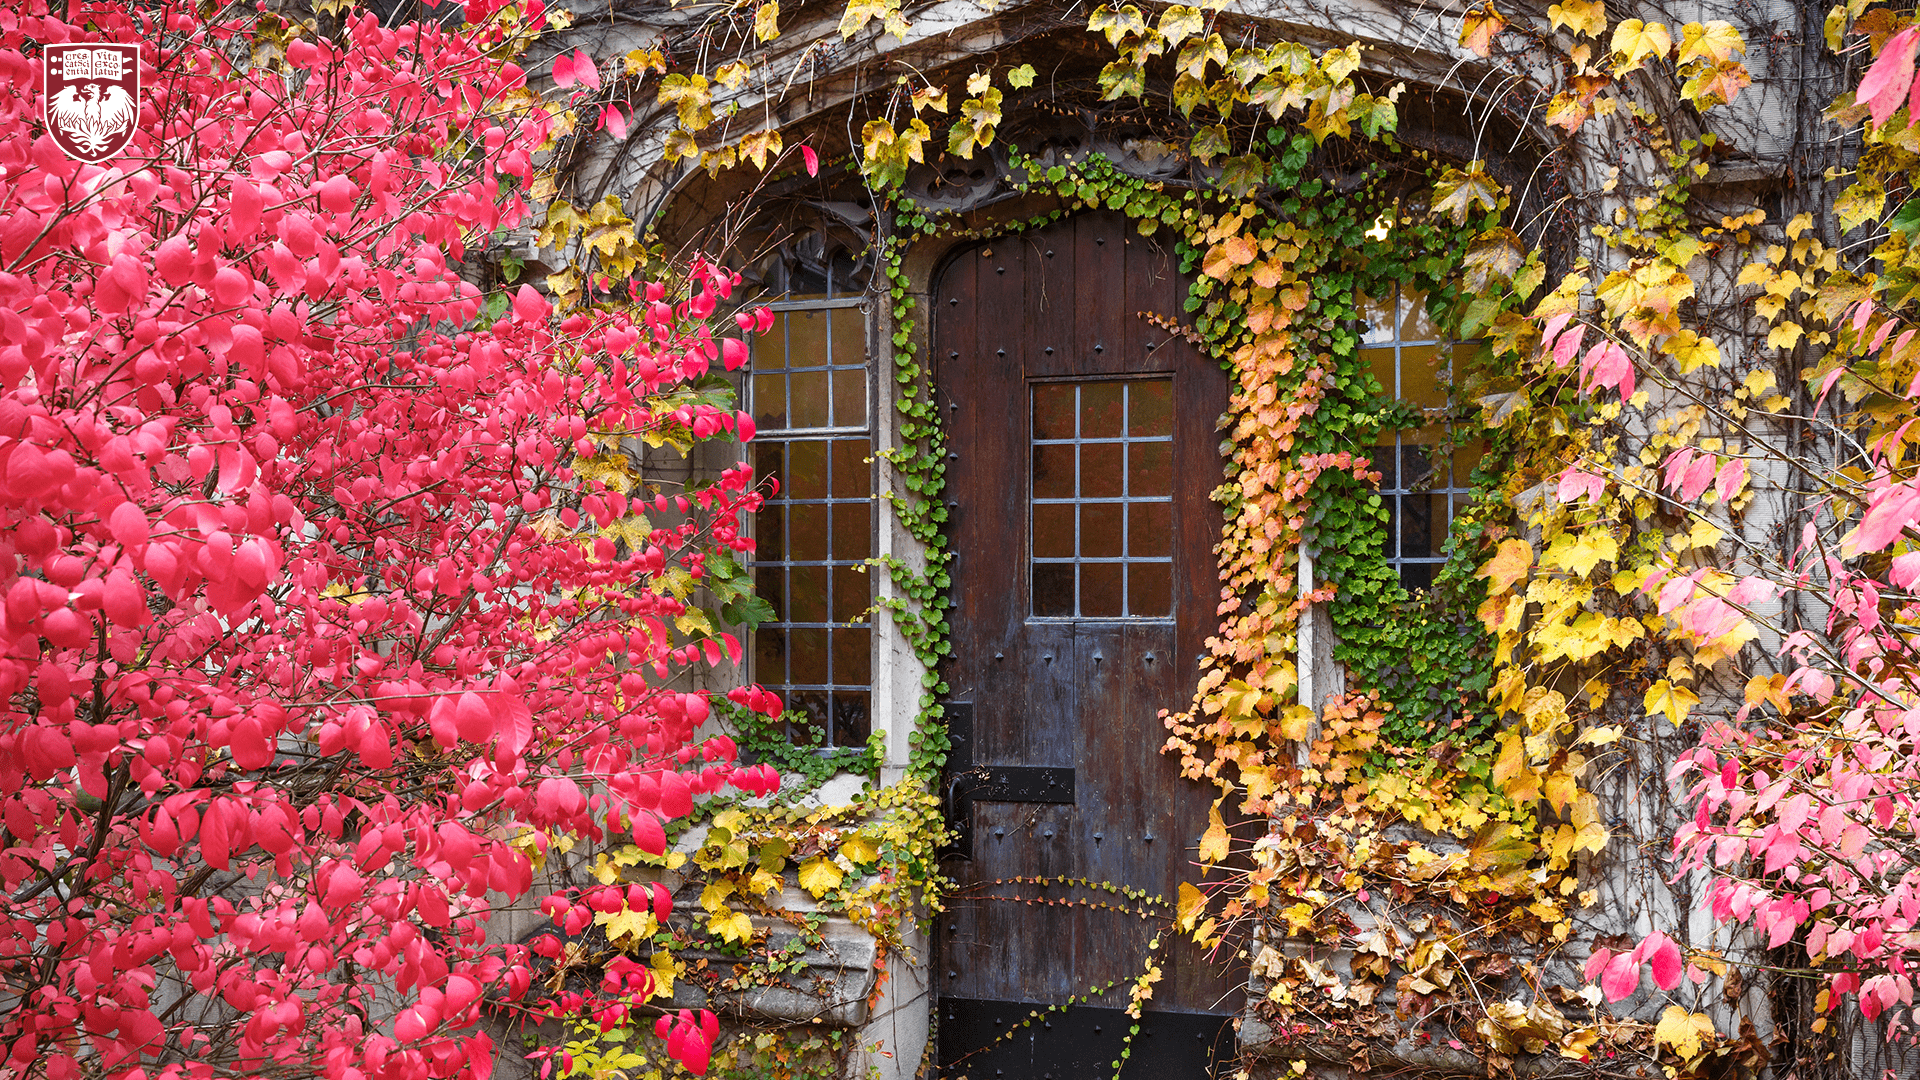 Vintage wood door surrounded by yellow, green, and red ivy leaves and vines